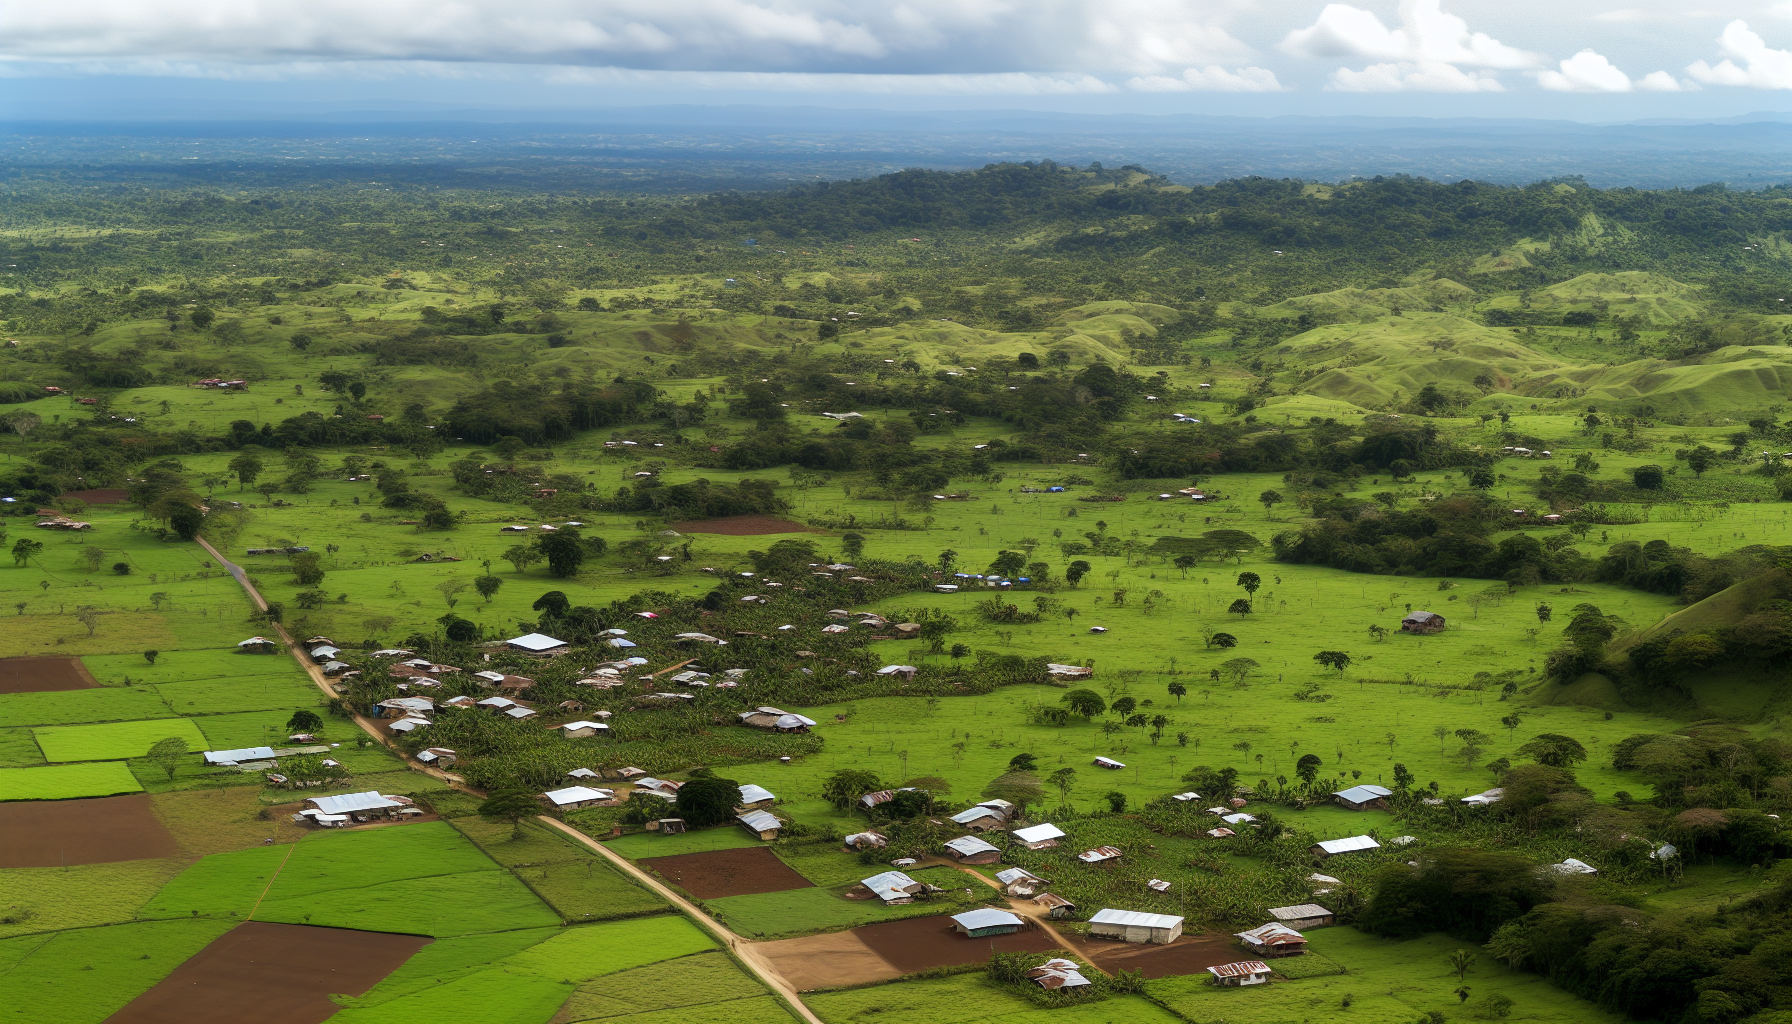 Aerial view of rural areas in Costa Rica